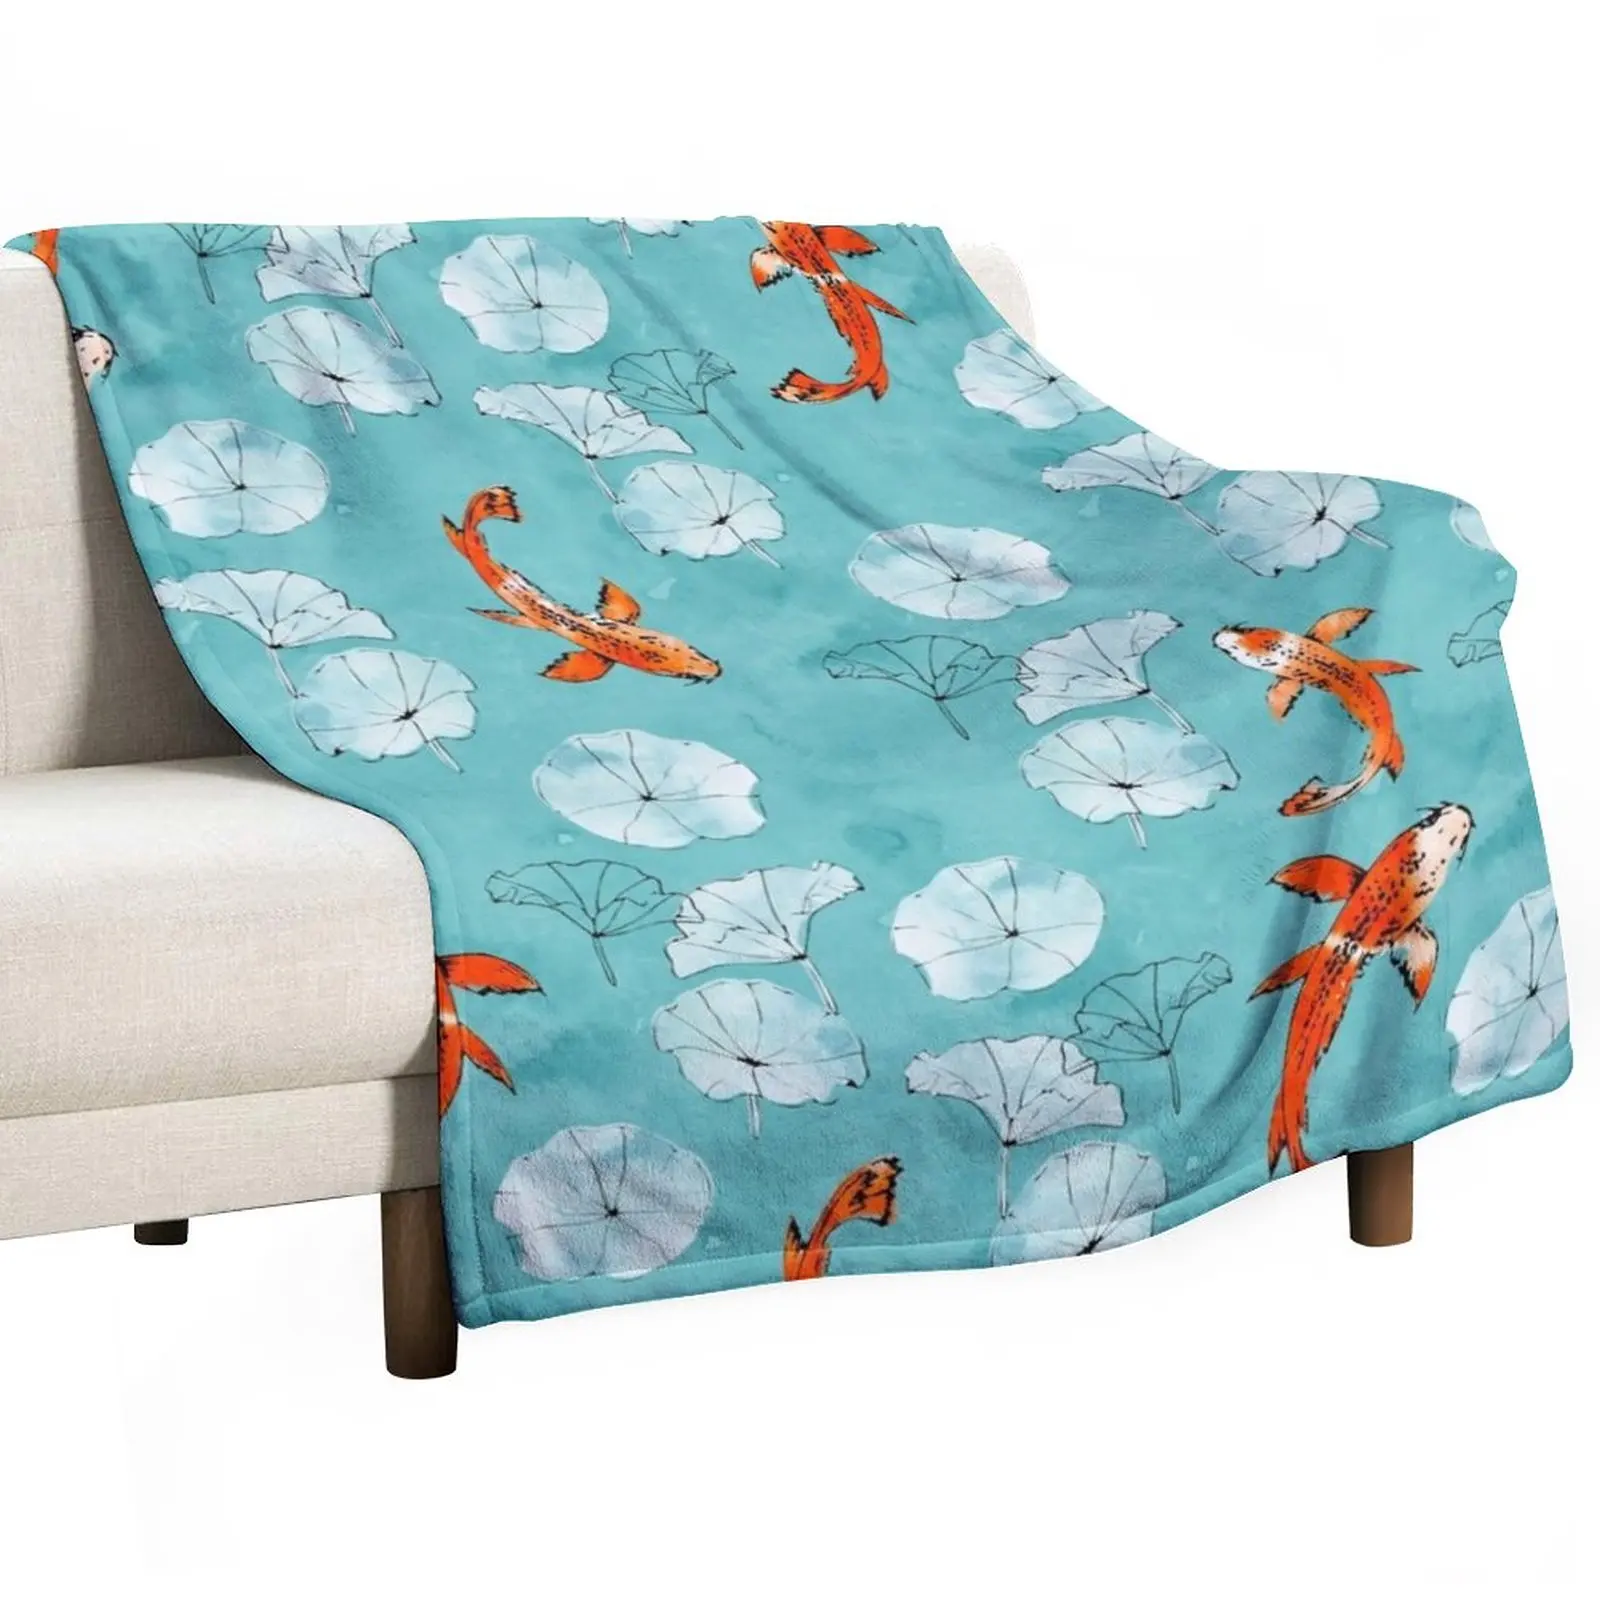 

Waterlily koi in turquoise Throw Blanket Giant Sofa Blanket For Sofa Thin Soft Plush Plaid Winter bed blankets